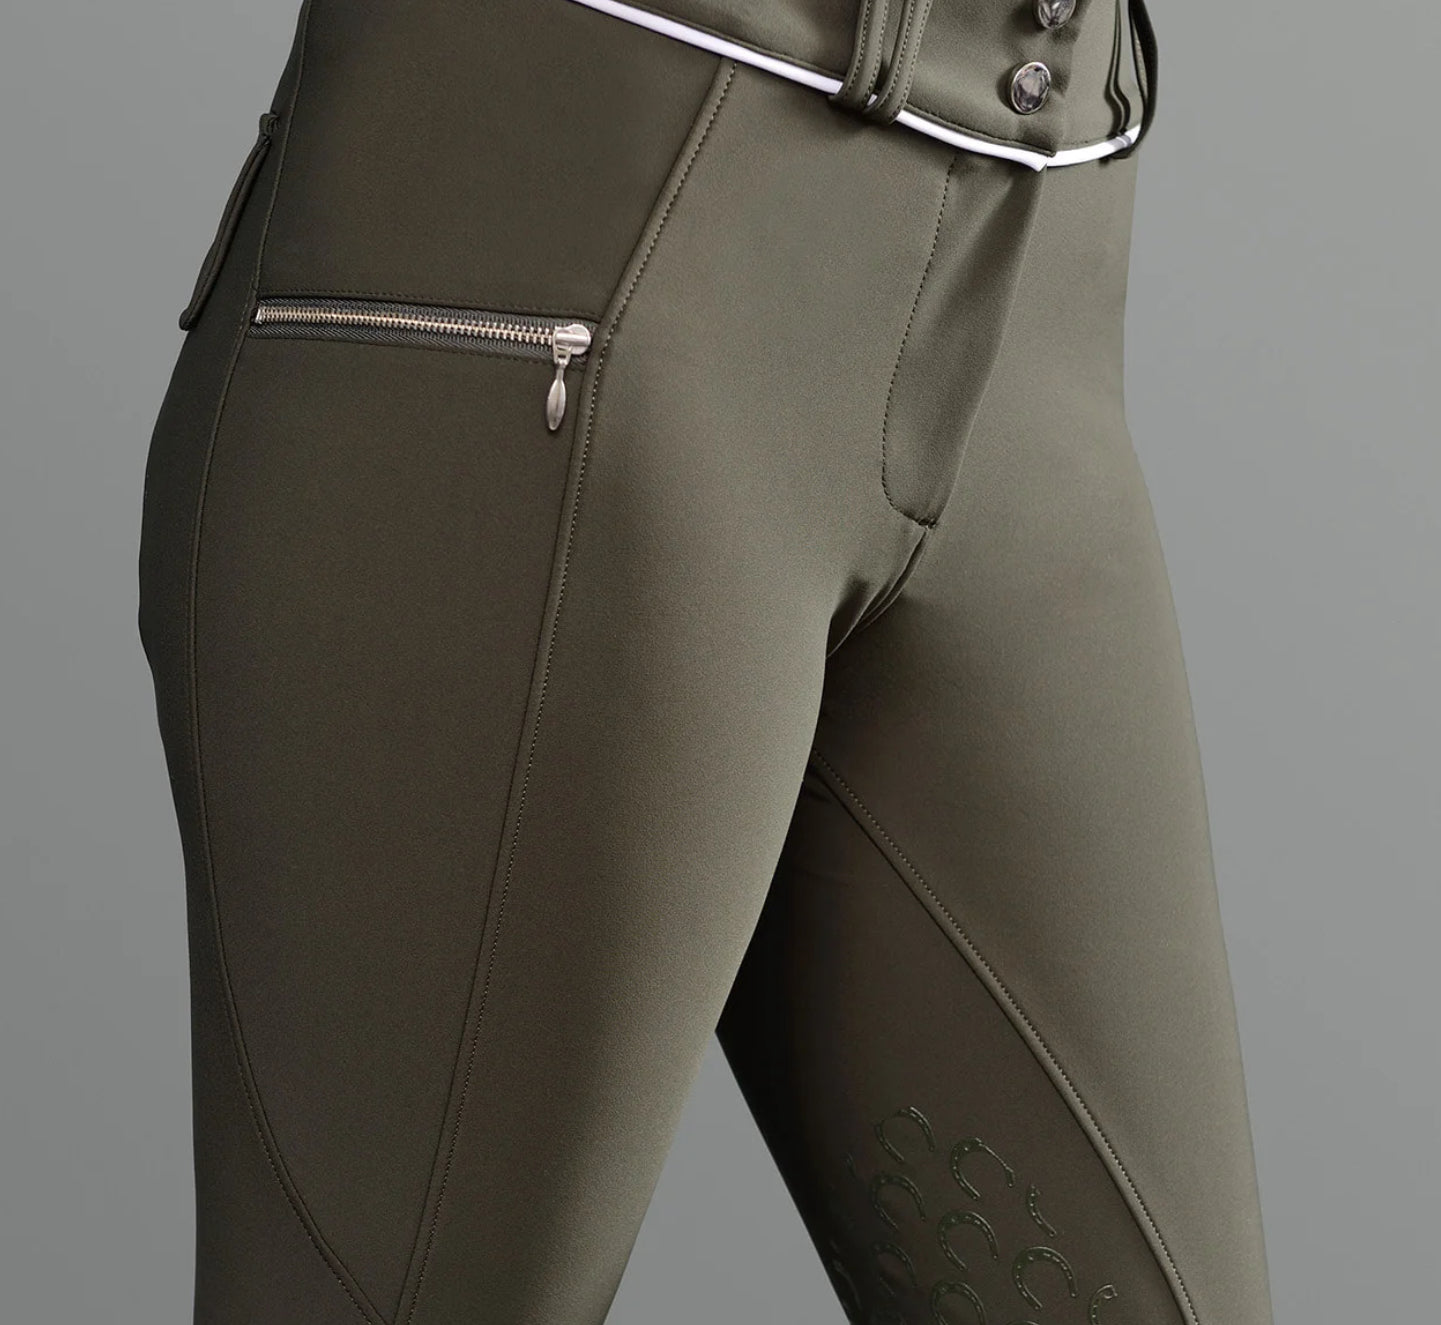  Womens Riding Tights Knee-Patch Breeches Equestrian